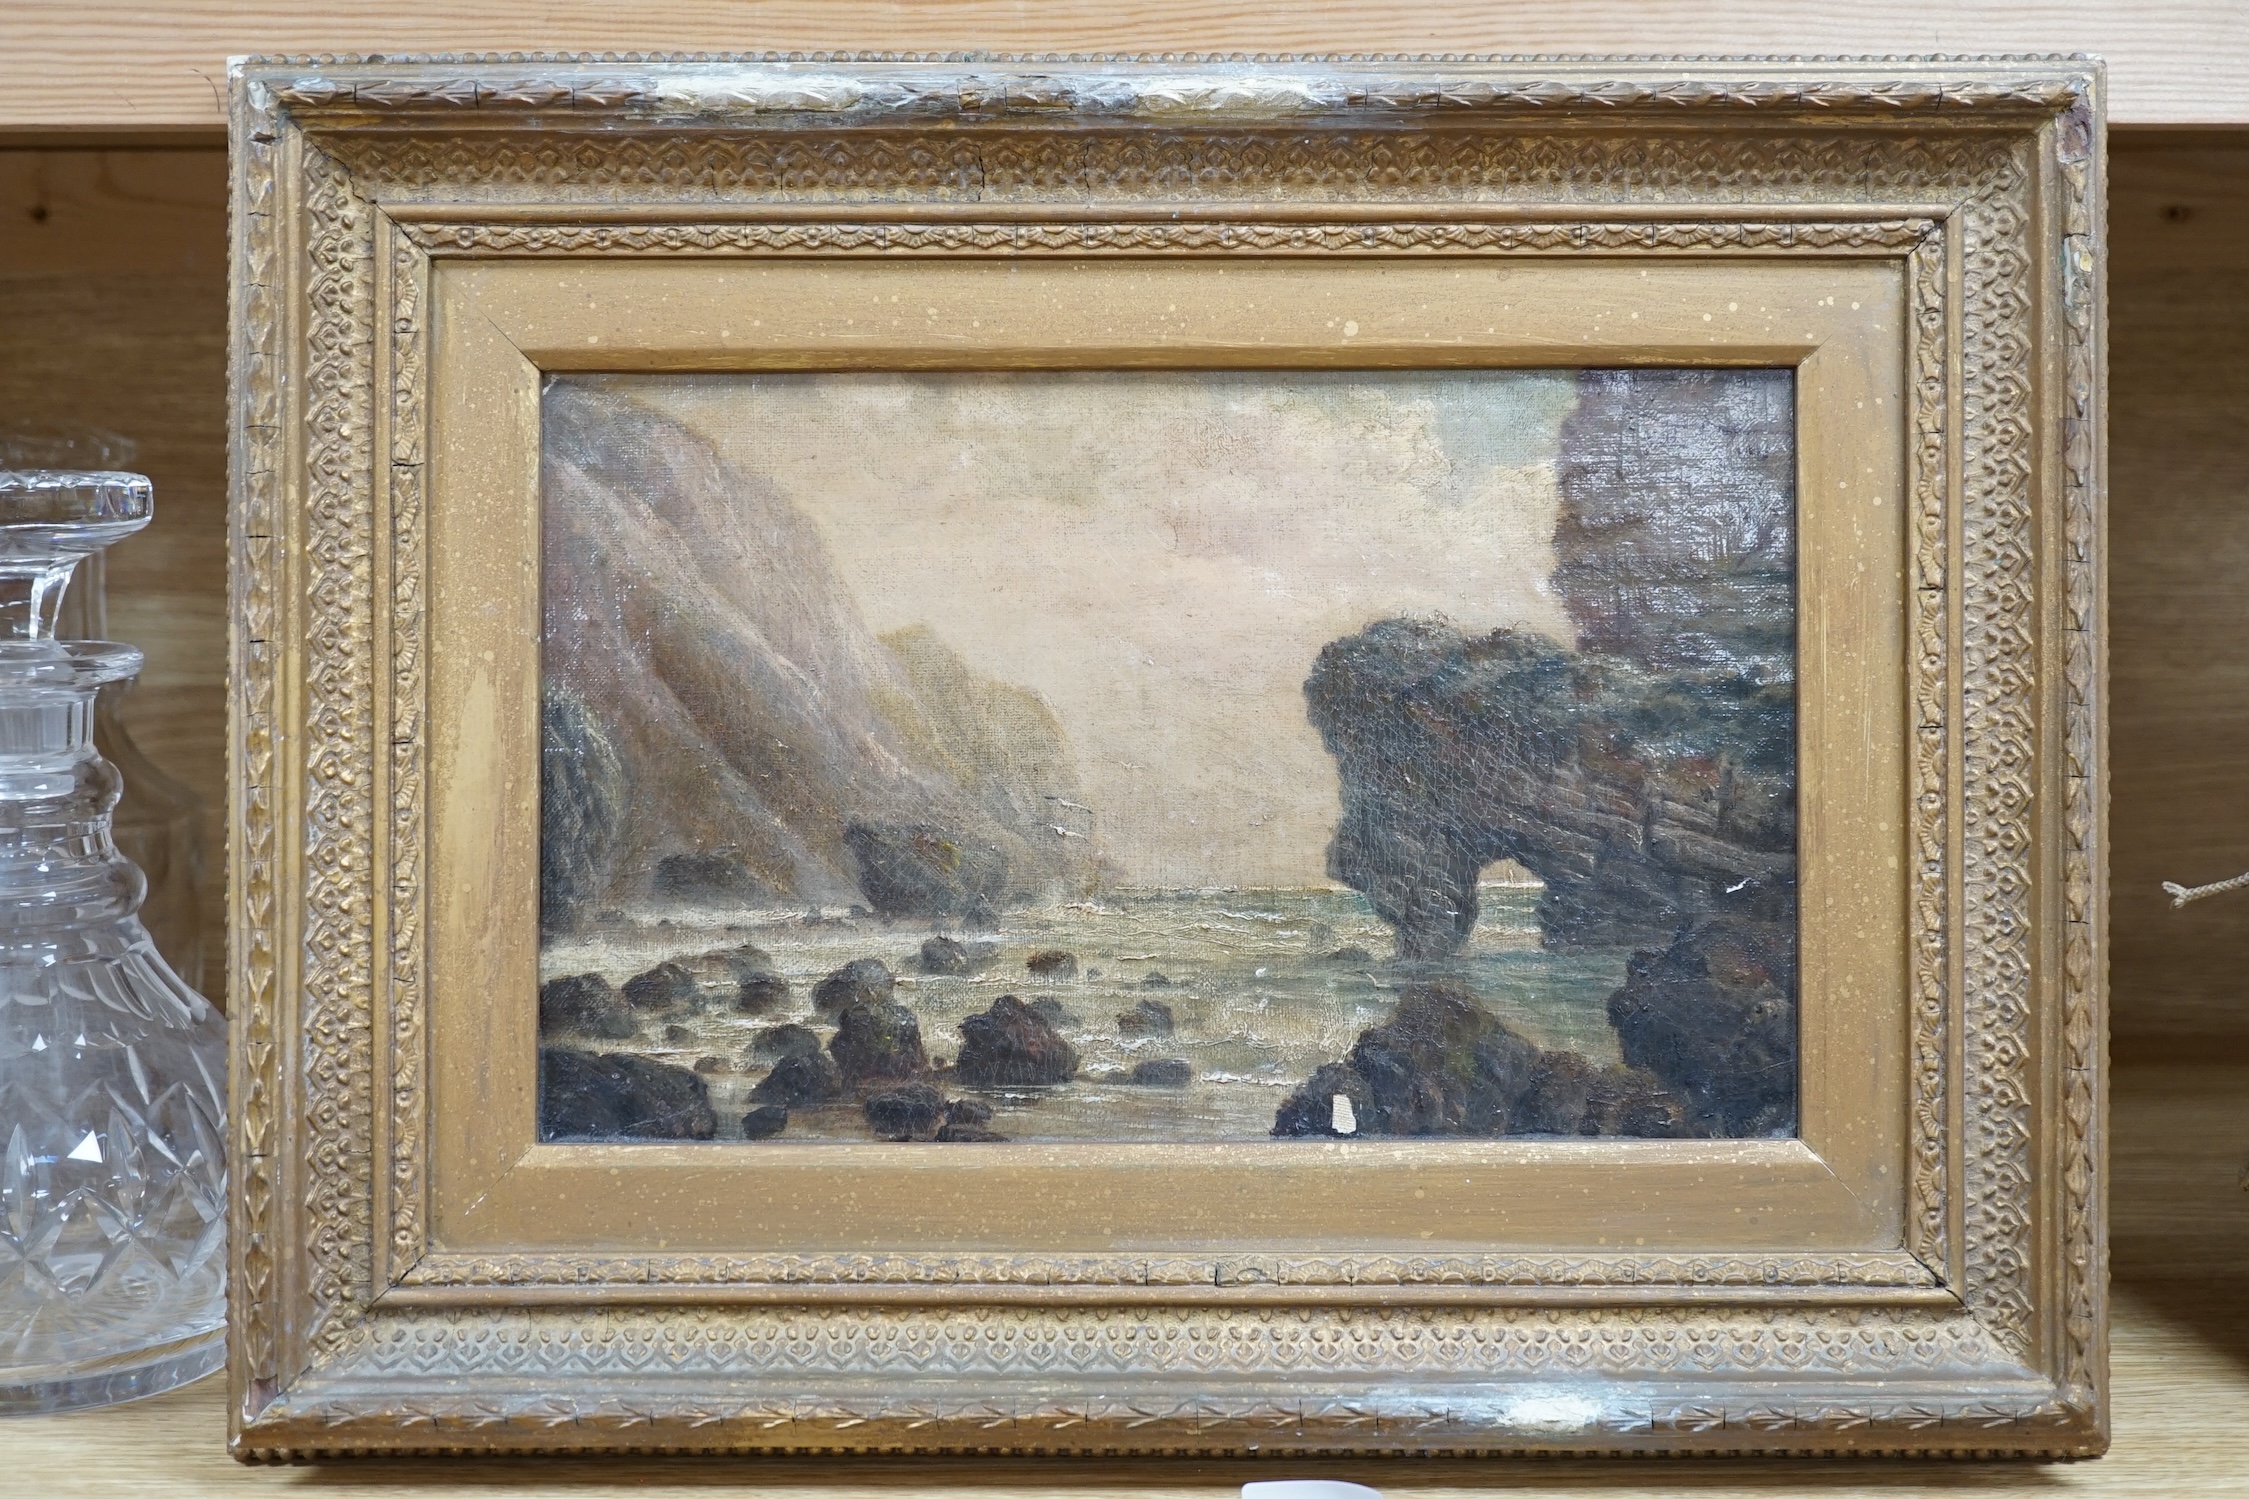 19th century English School, oil on board, Dorset Jurassic coast, showing a coastal rock formation similar to Durdle Door, 18 x 29cm, gilt frame. Condition - fair, some paint chips